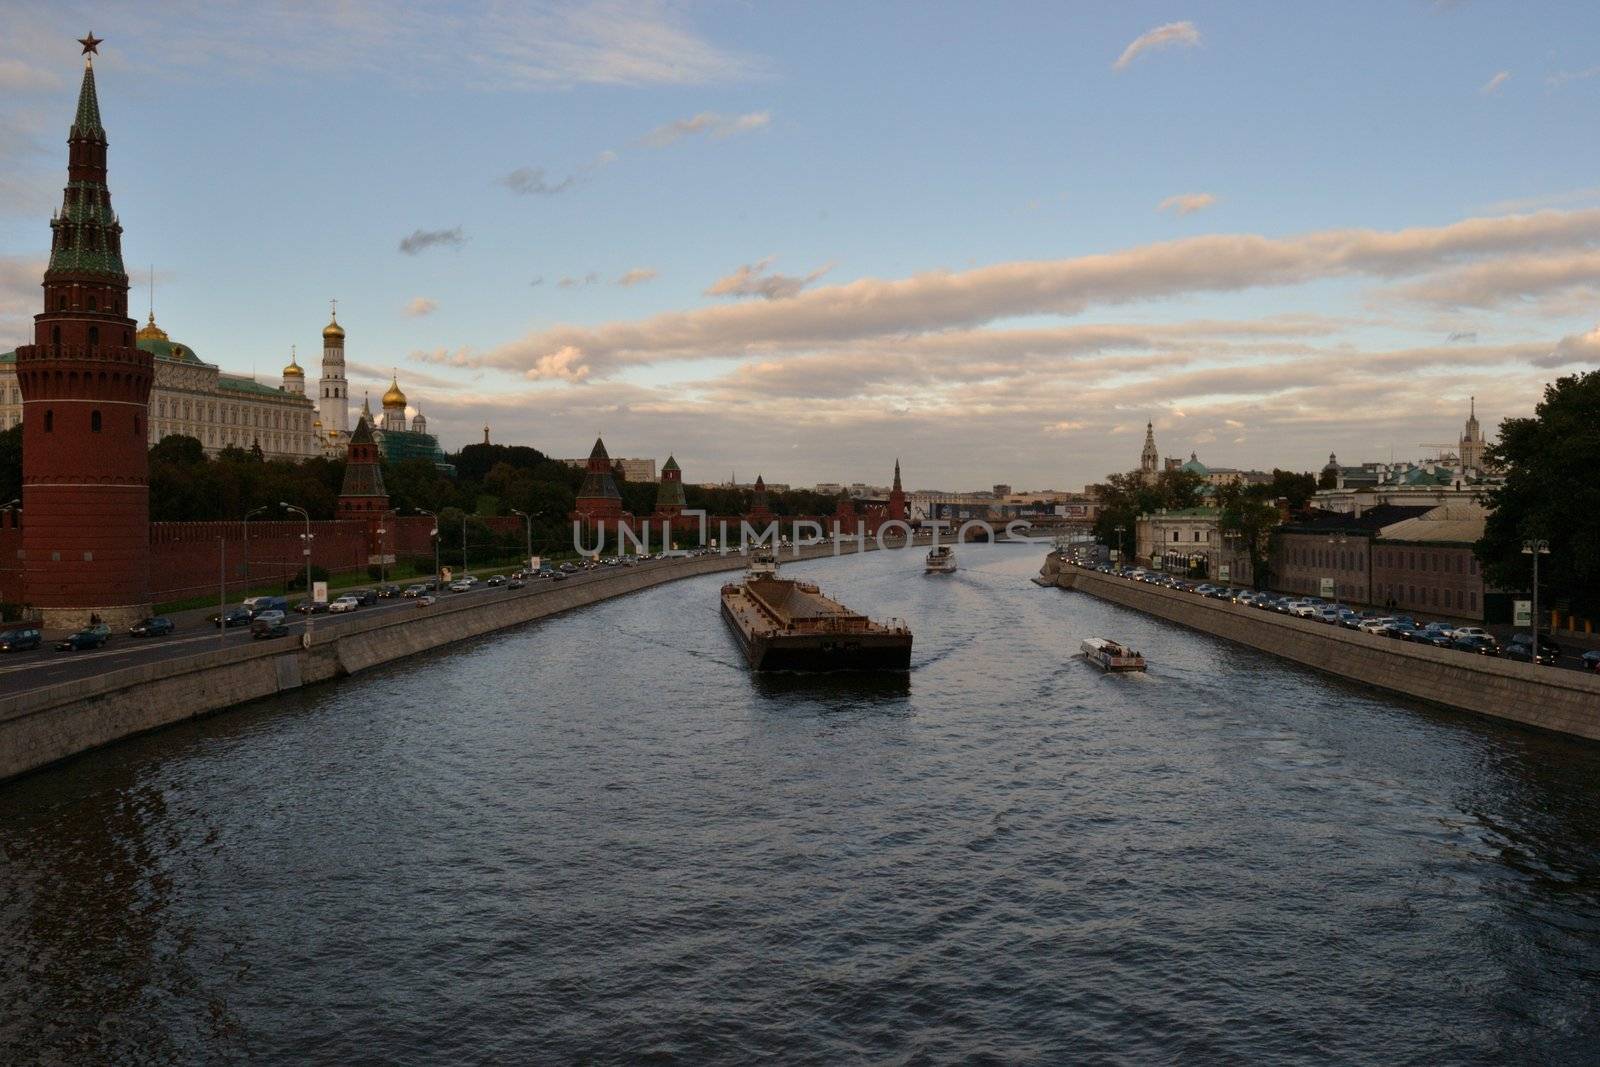 The Moscow river in the evening by Autre